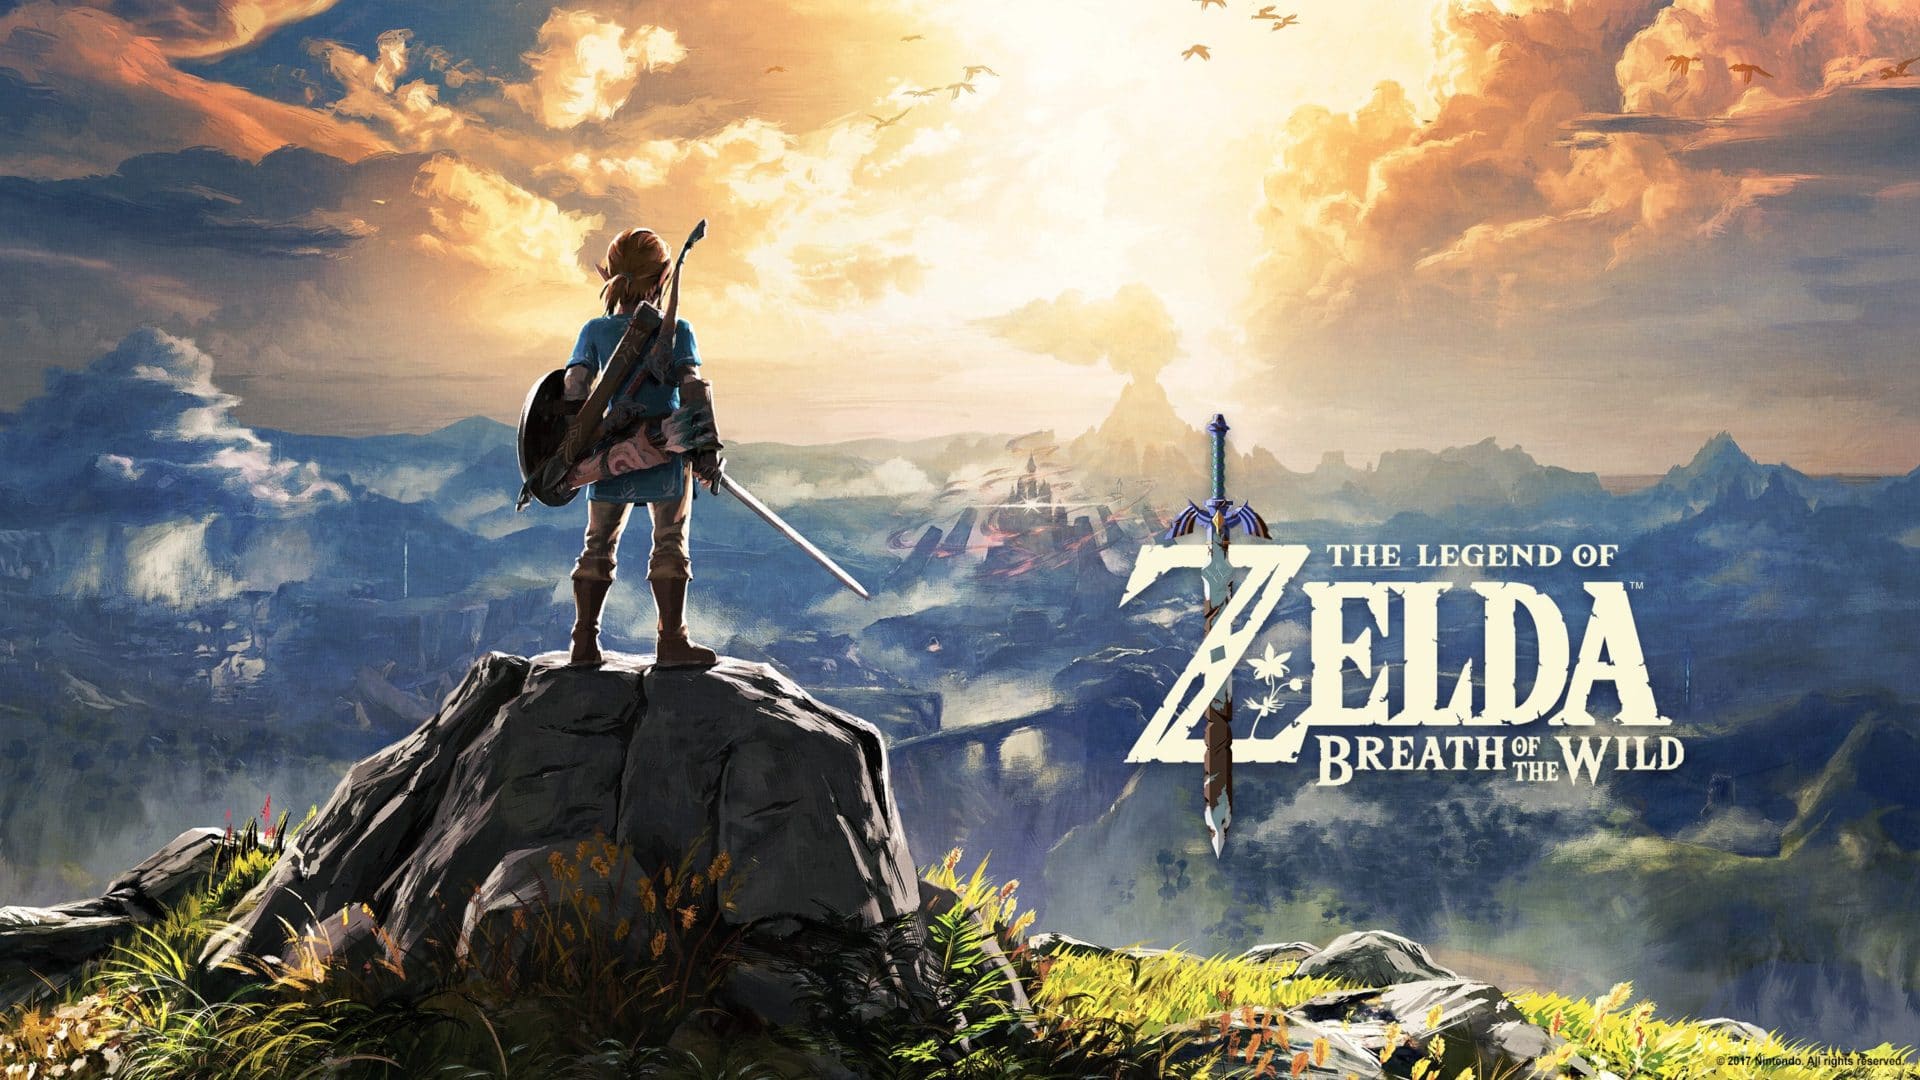 Breath of the Wild – best selling Zelda since Ocarina of Time in Japan